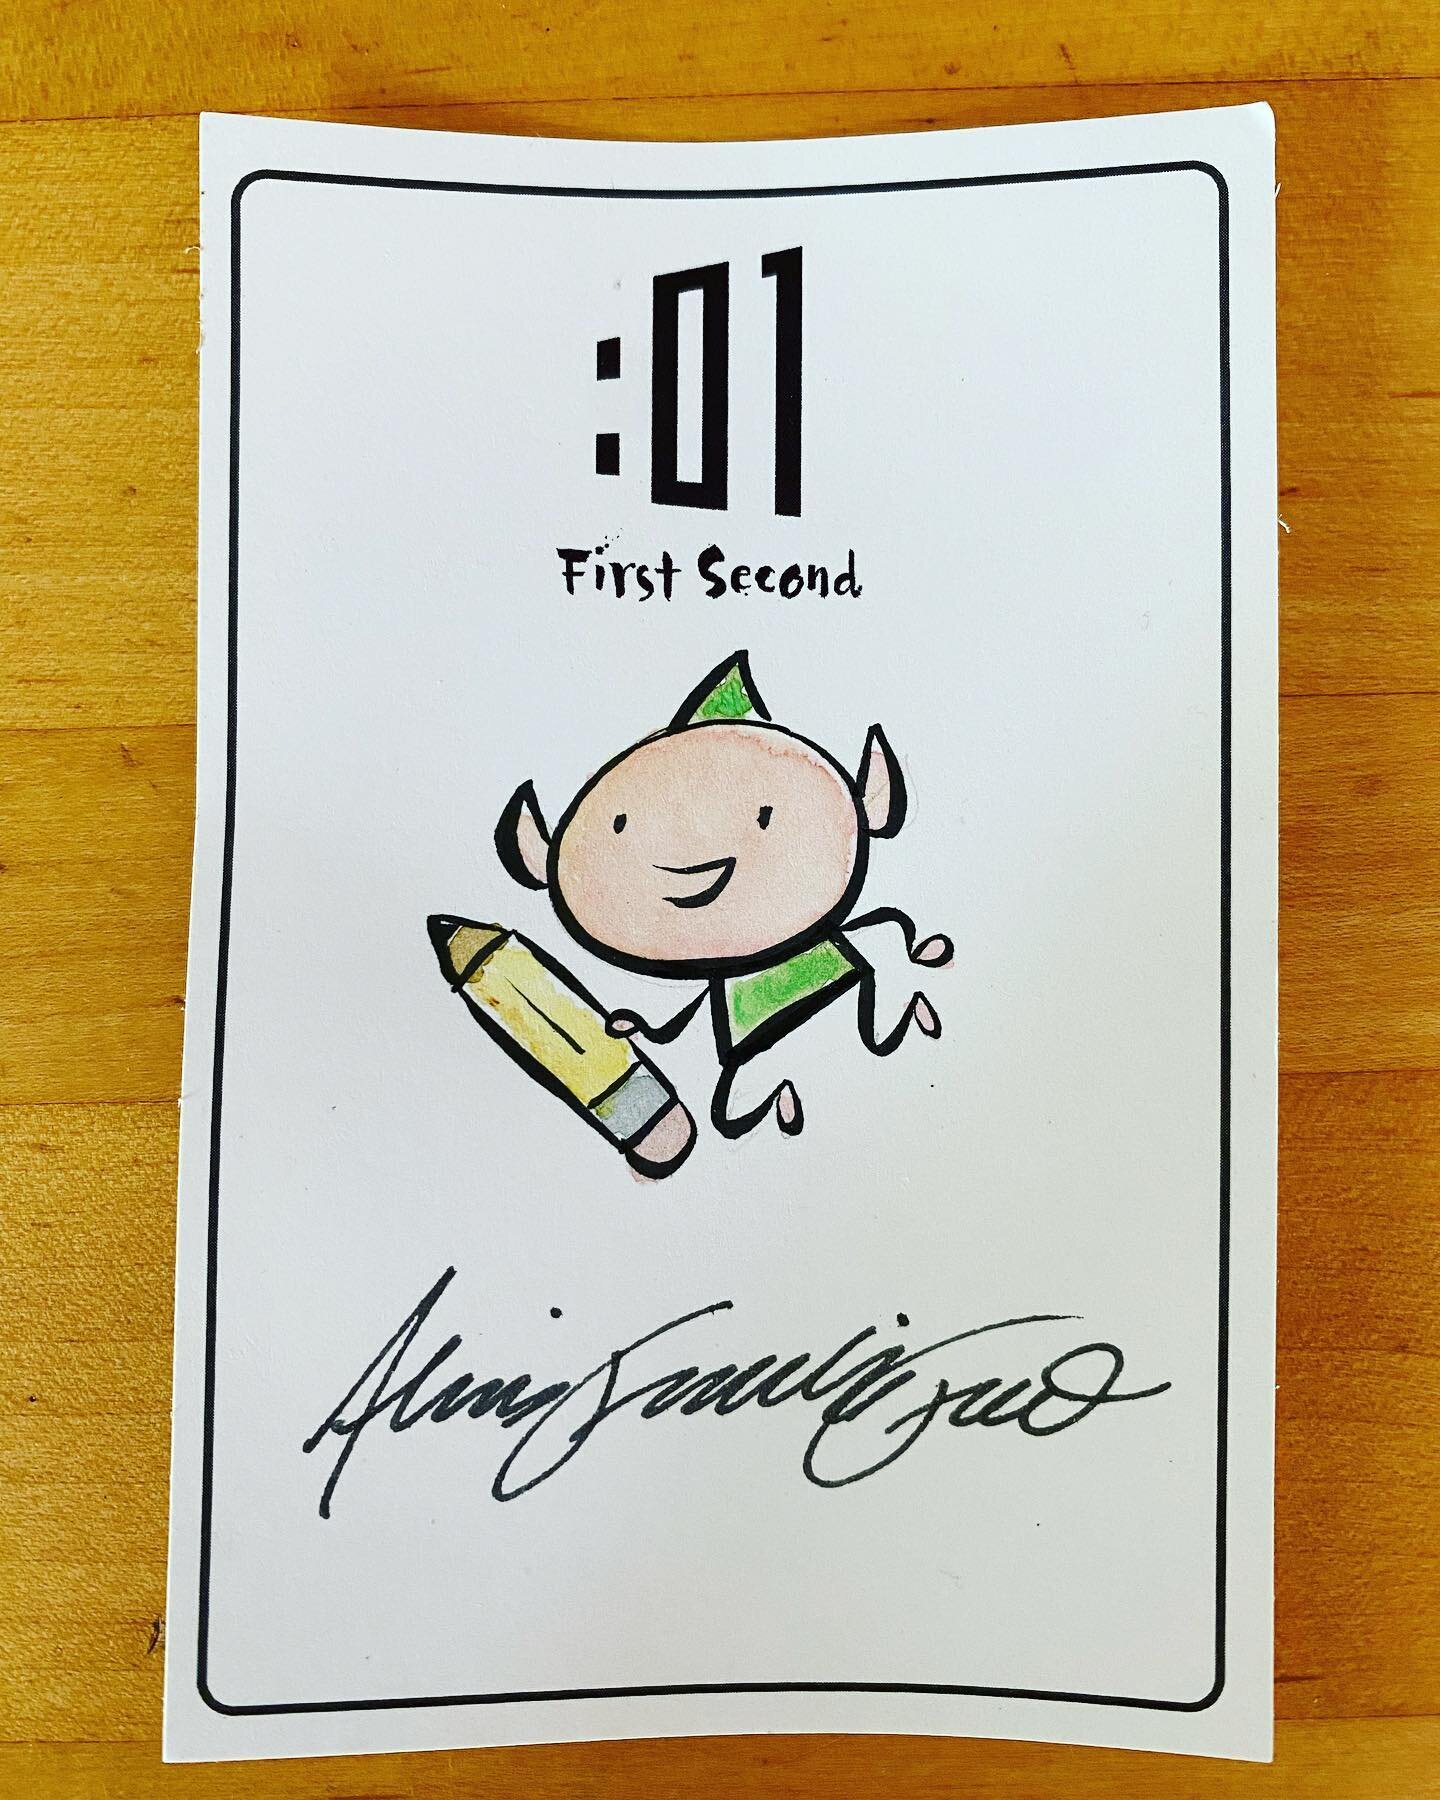 One of the cool things we are doing for the launch of ADVENTURES IN CARTOONING: CREATE A WORLD are a limited amount unique book plates drawn by James, Andrew, and myself. I&rsquo;ll be posting more as I finish them.
.
.
.
#kidli #kidlitart #kidscomic